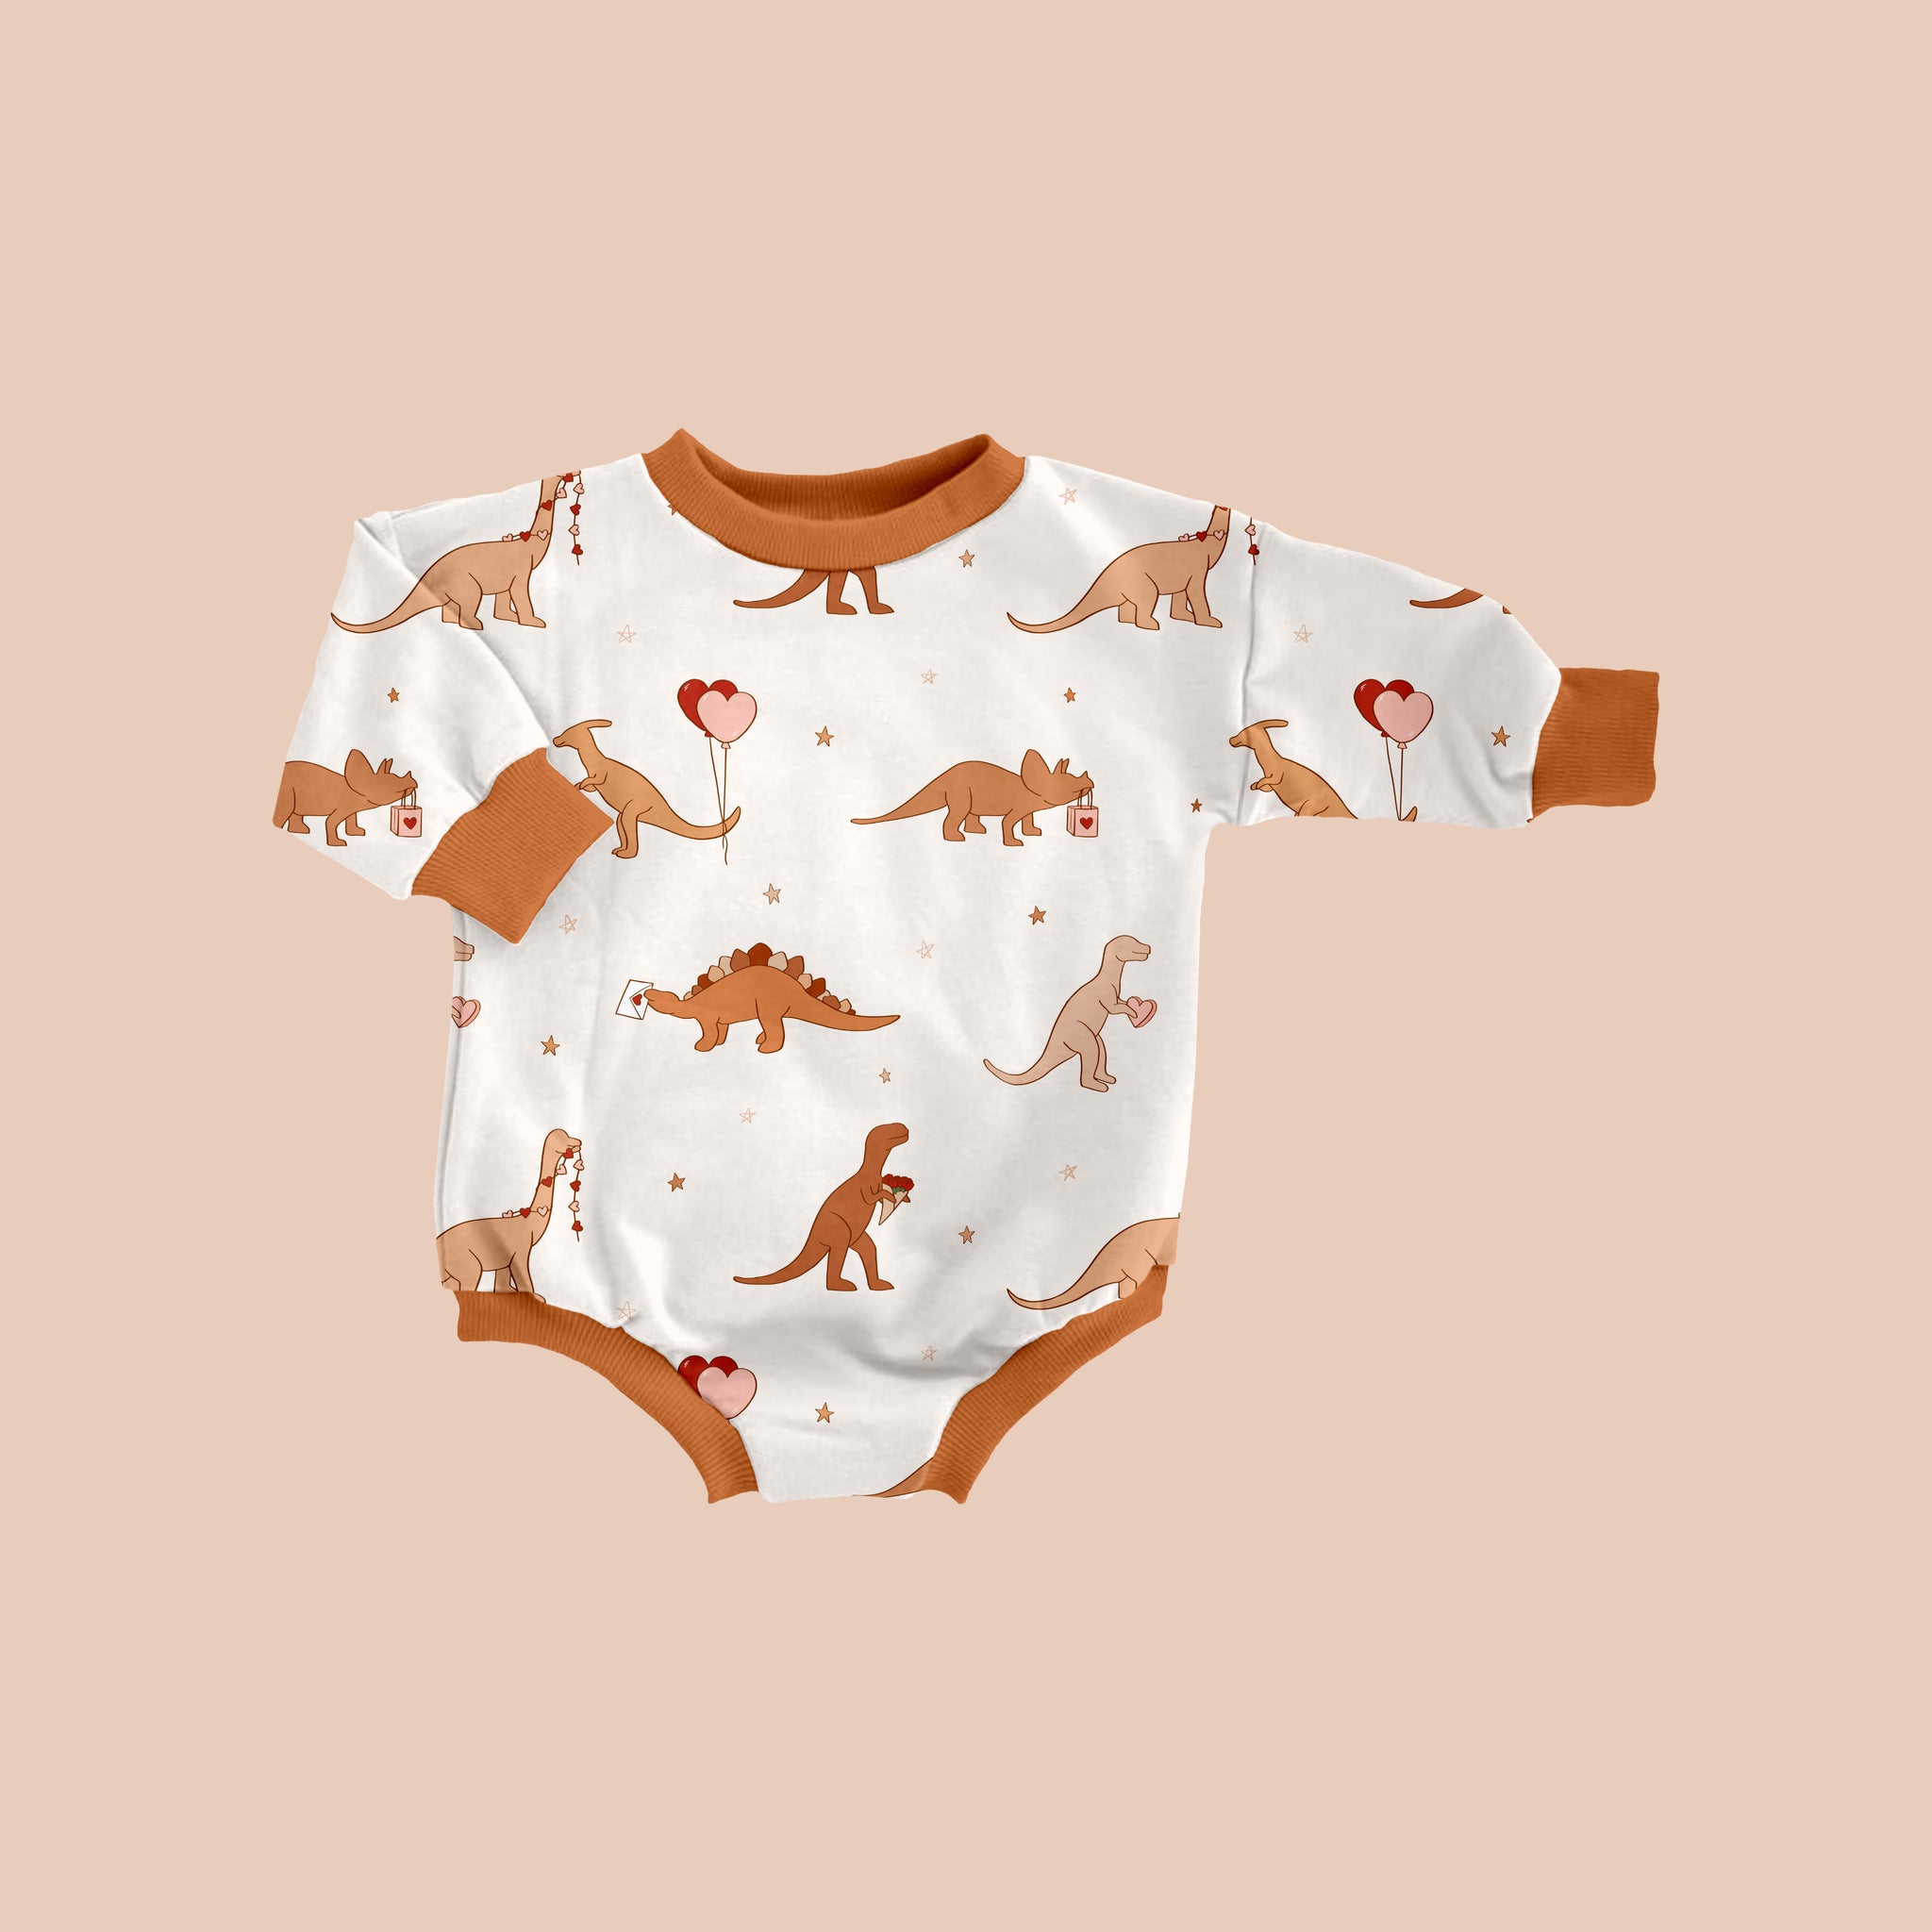 I love a Dino printbut the cut of this bodysuit.just looks..decidedly  uncomfortable. Like A LOT. : r/SHEIN_